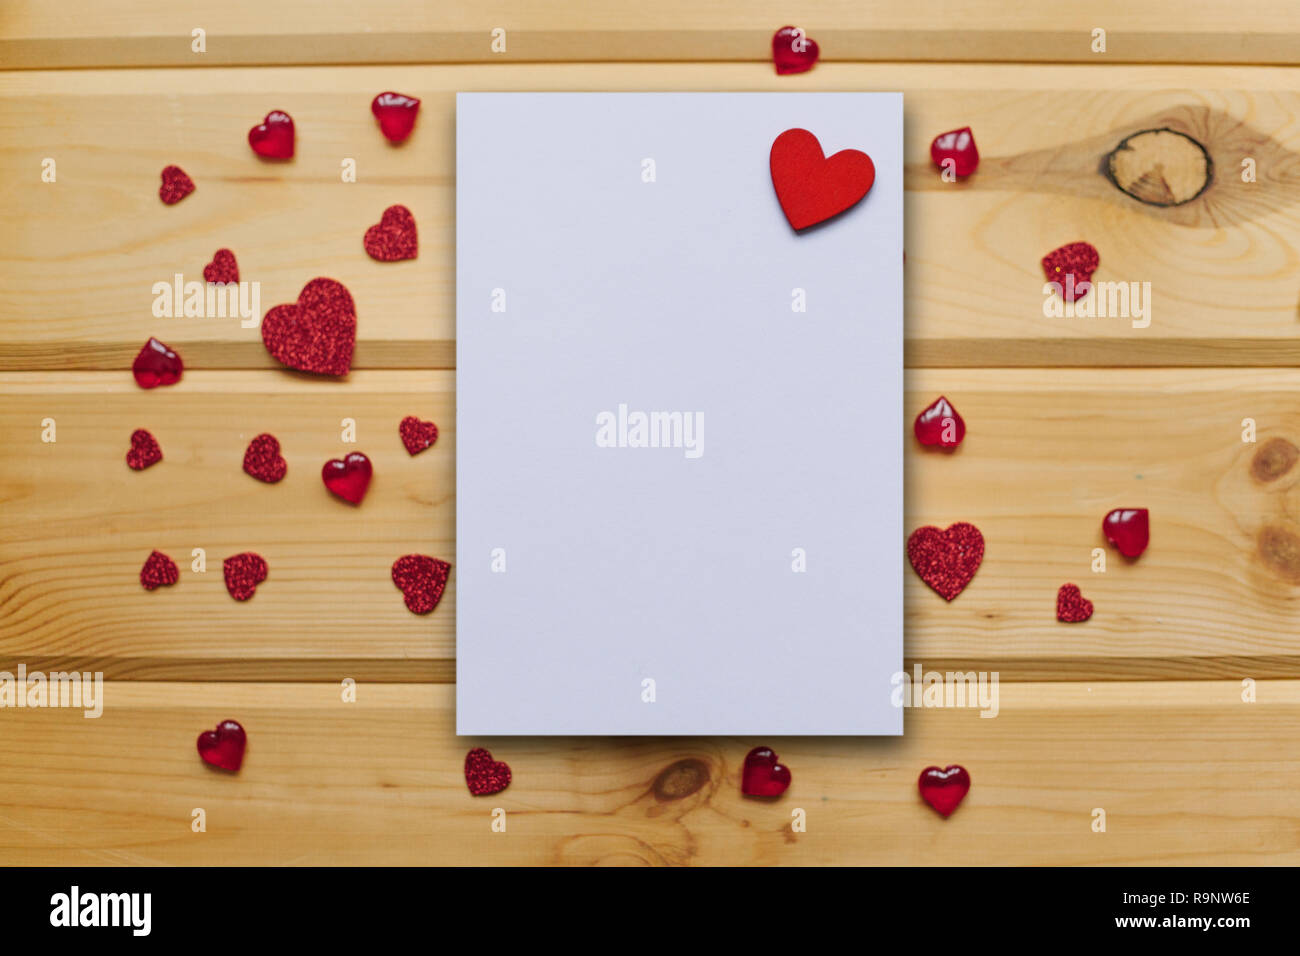 Blank sheet with red heart for text or write on a wooden surface